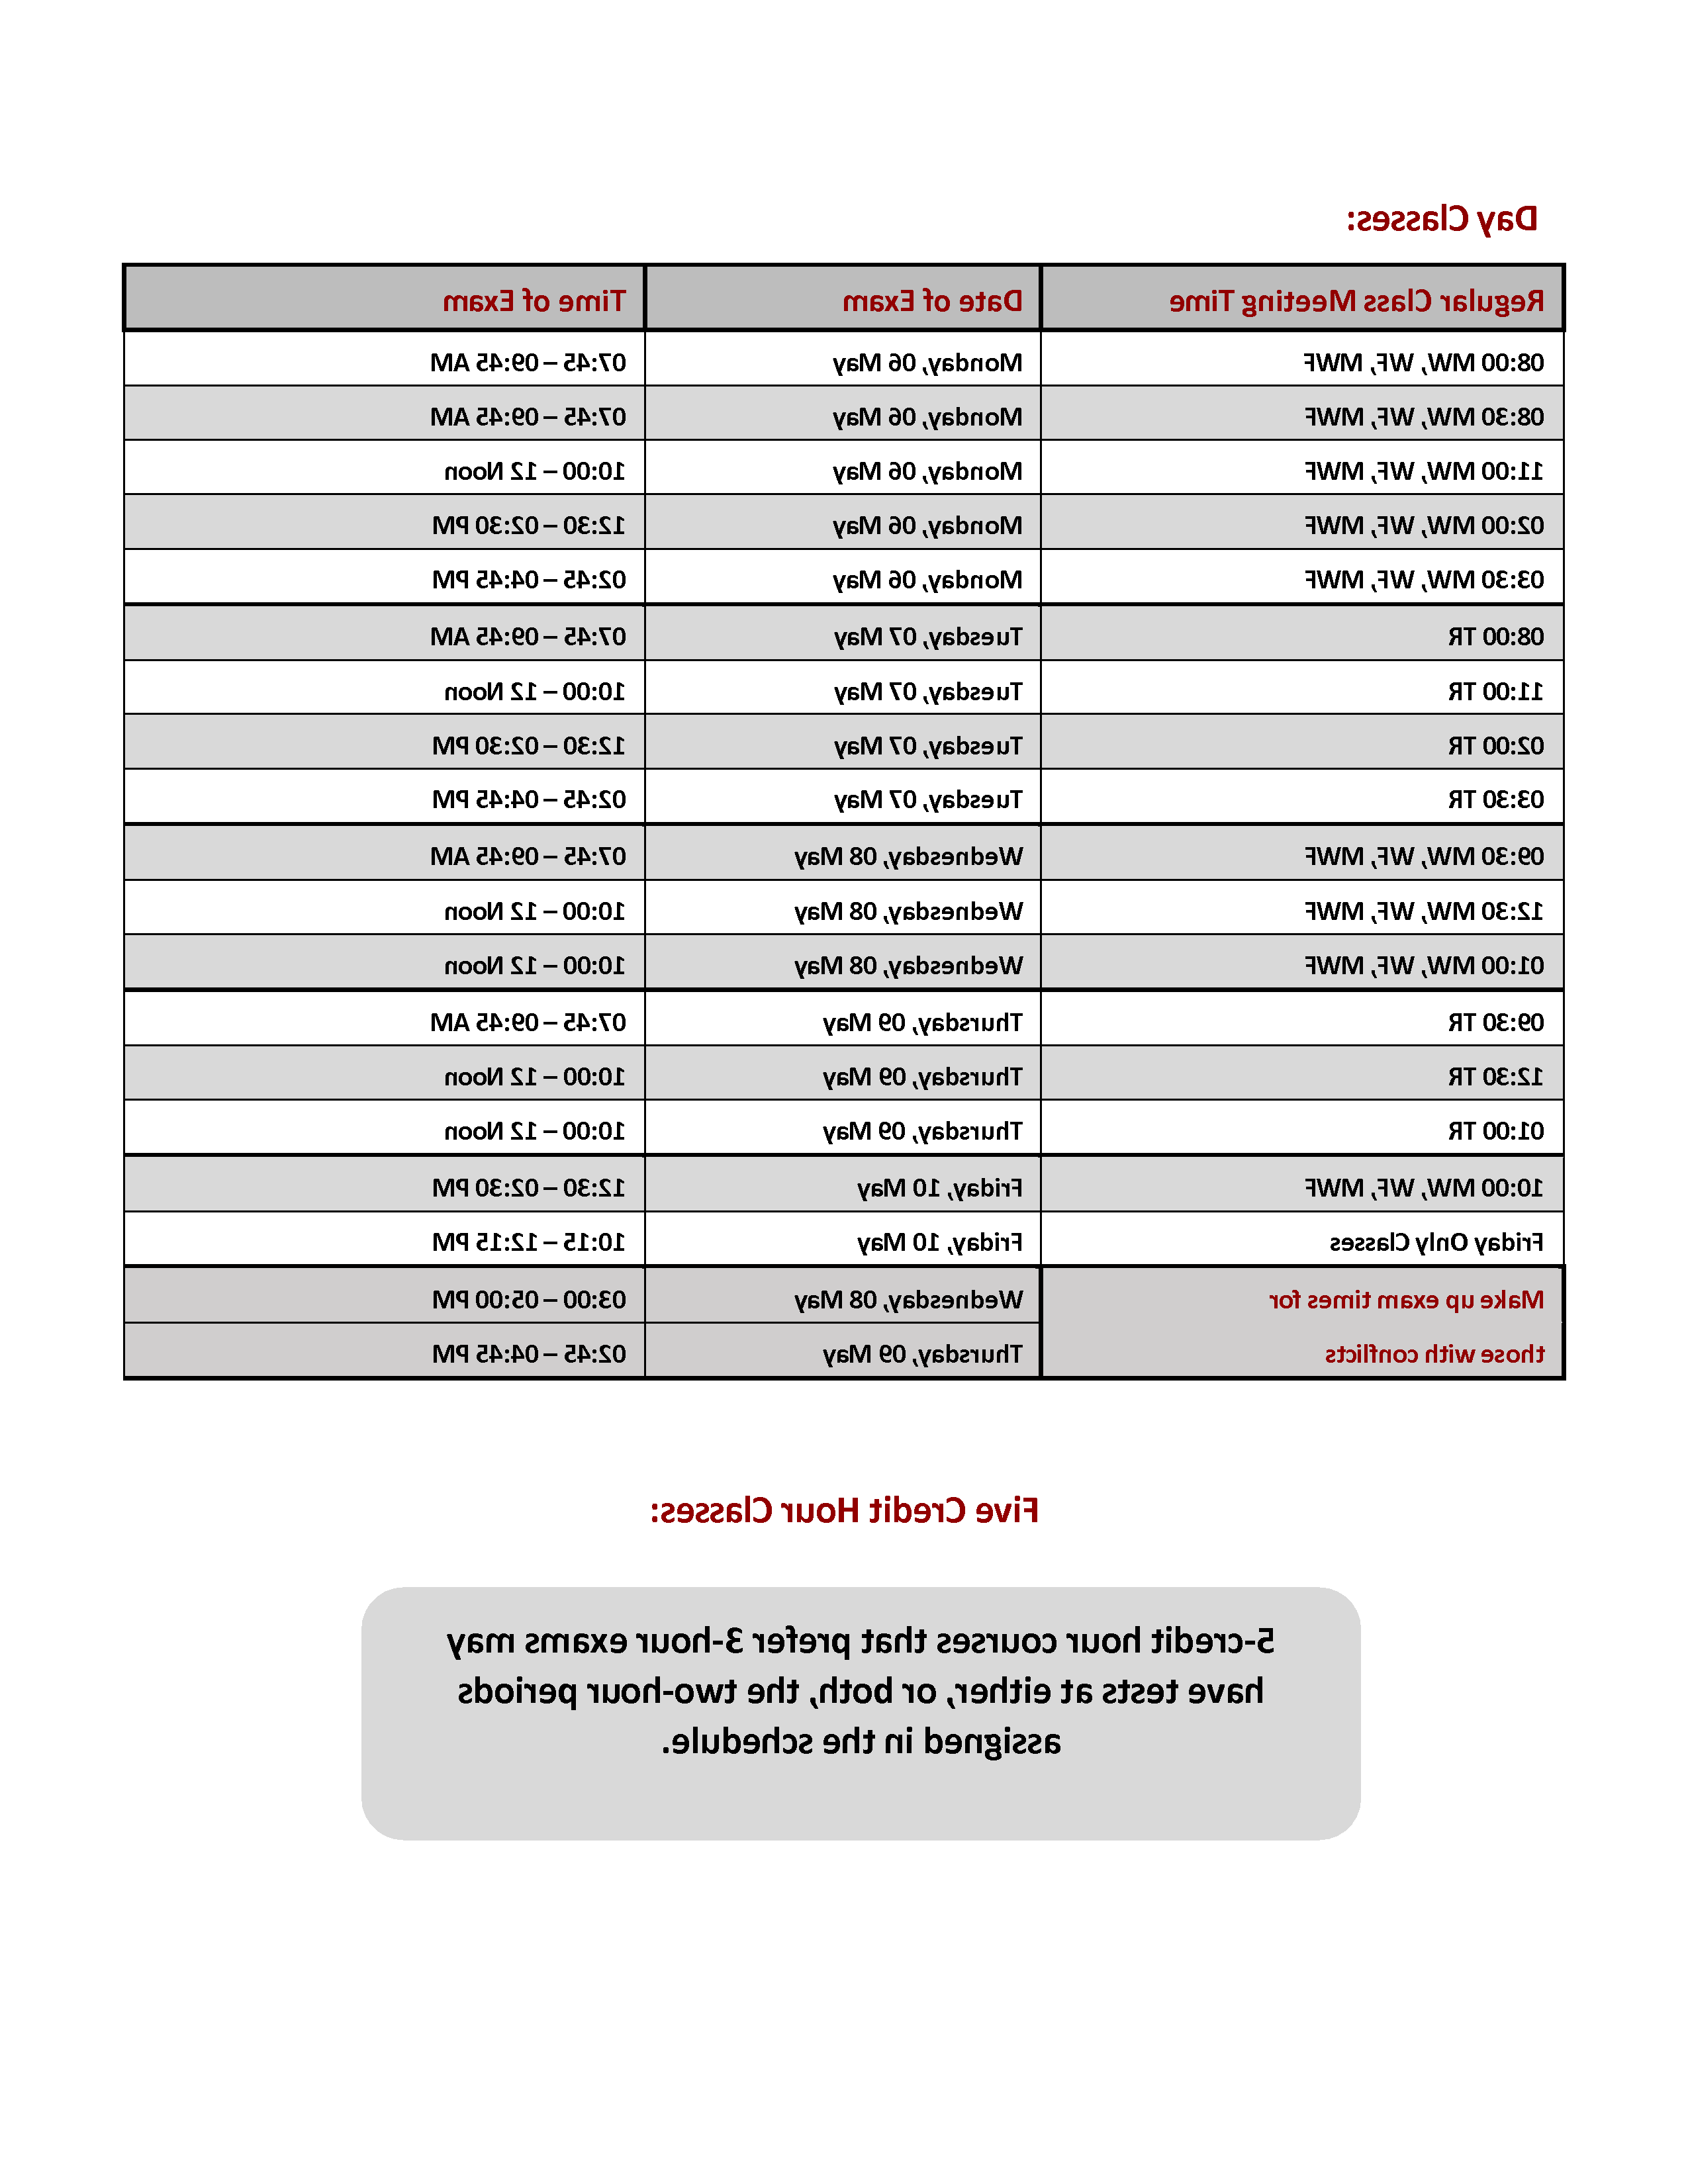 sp24-final-exam-schedule_page_2.png